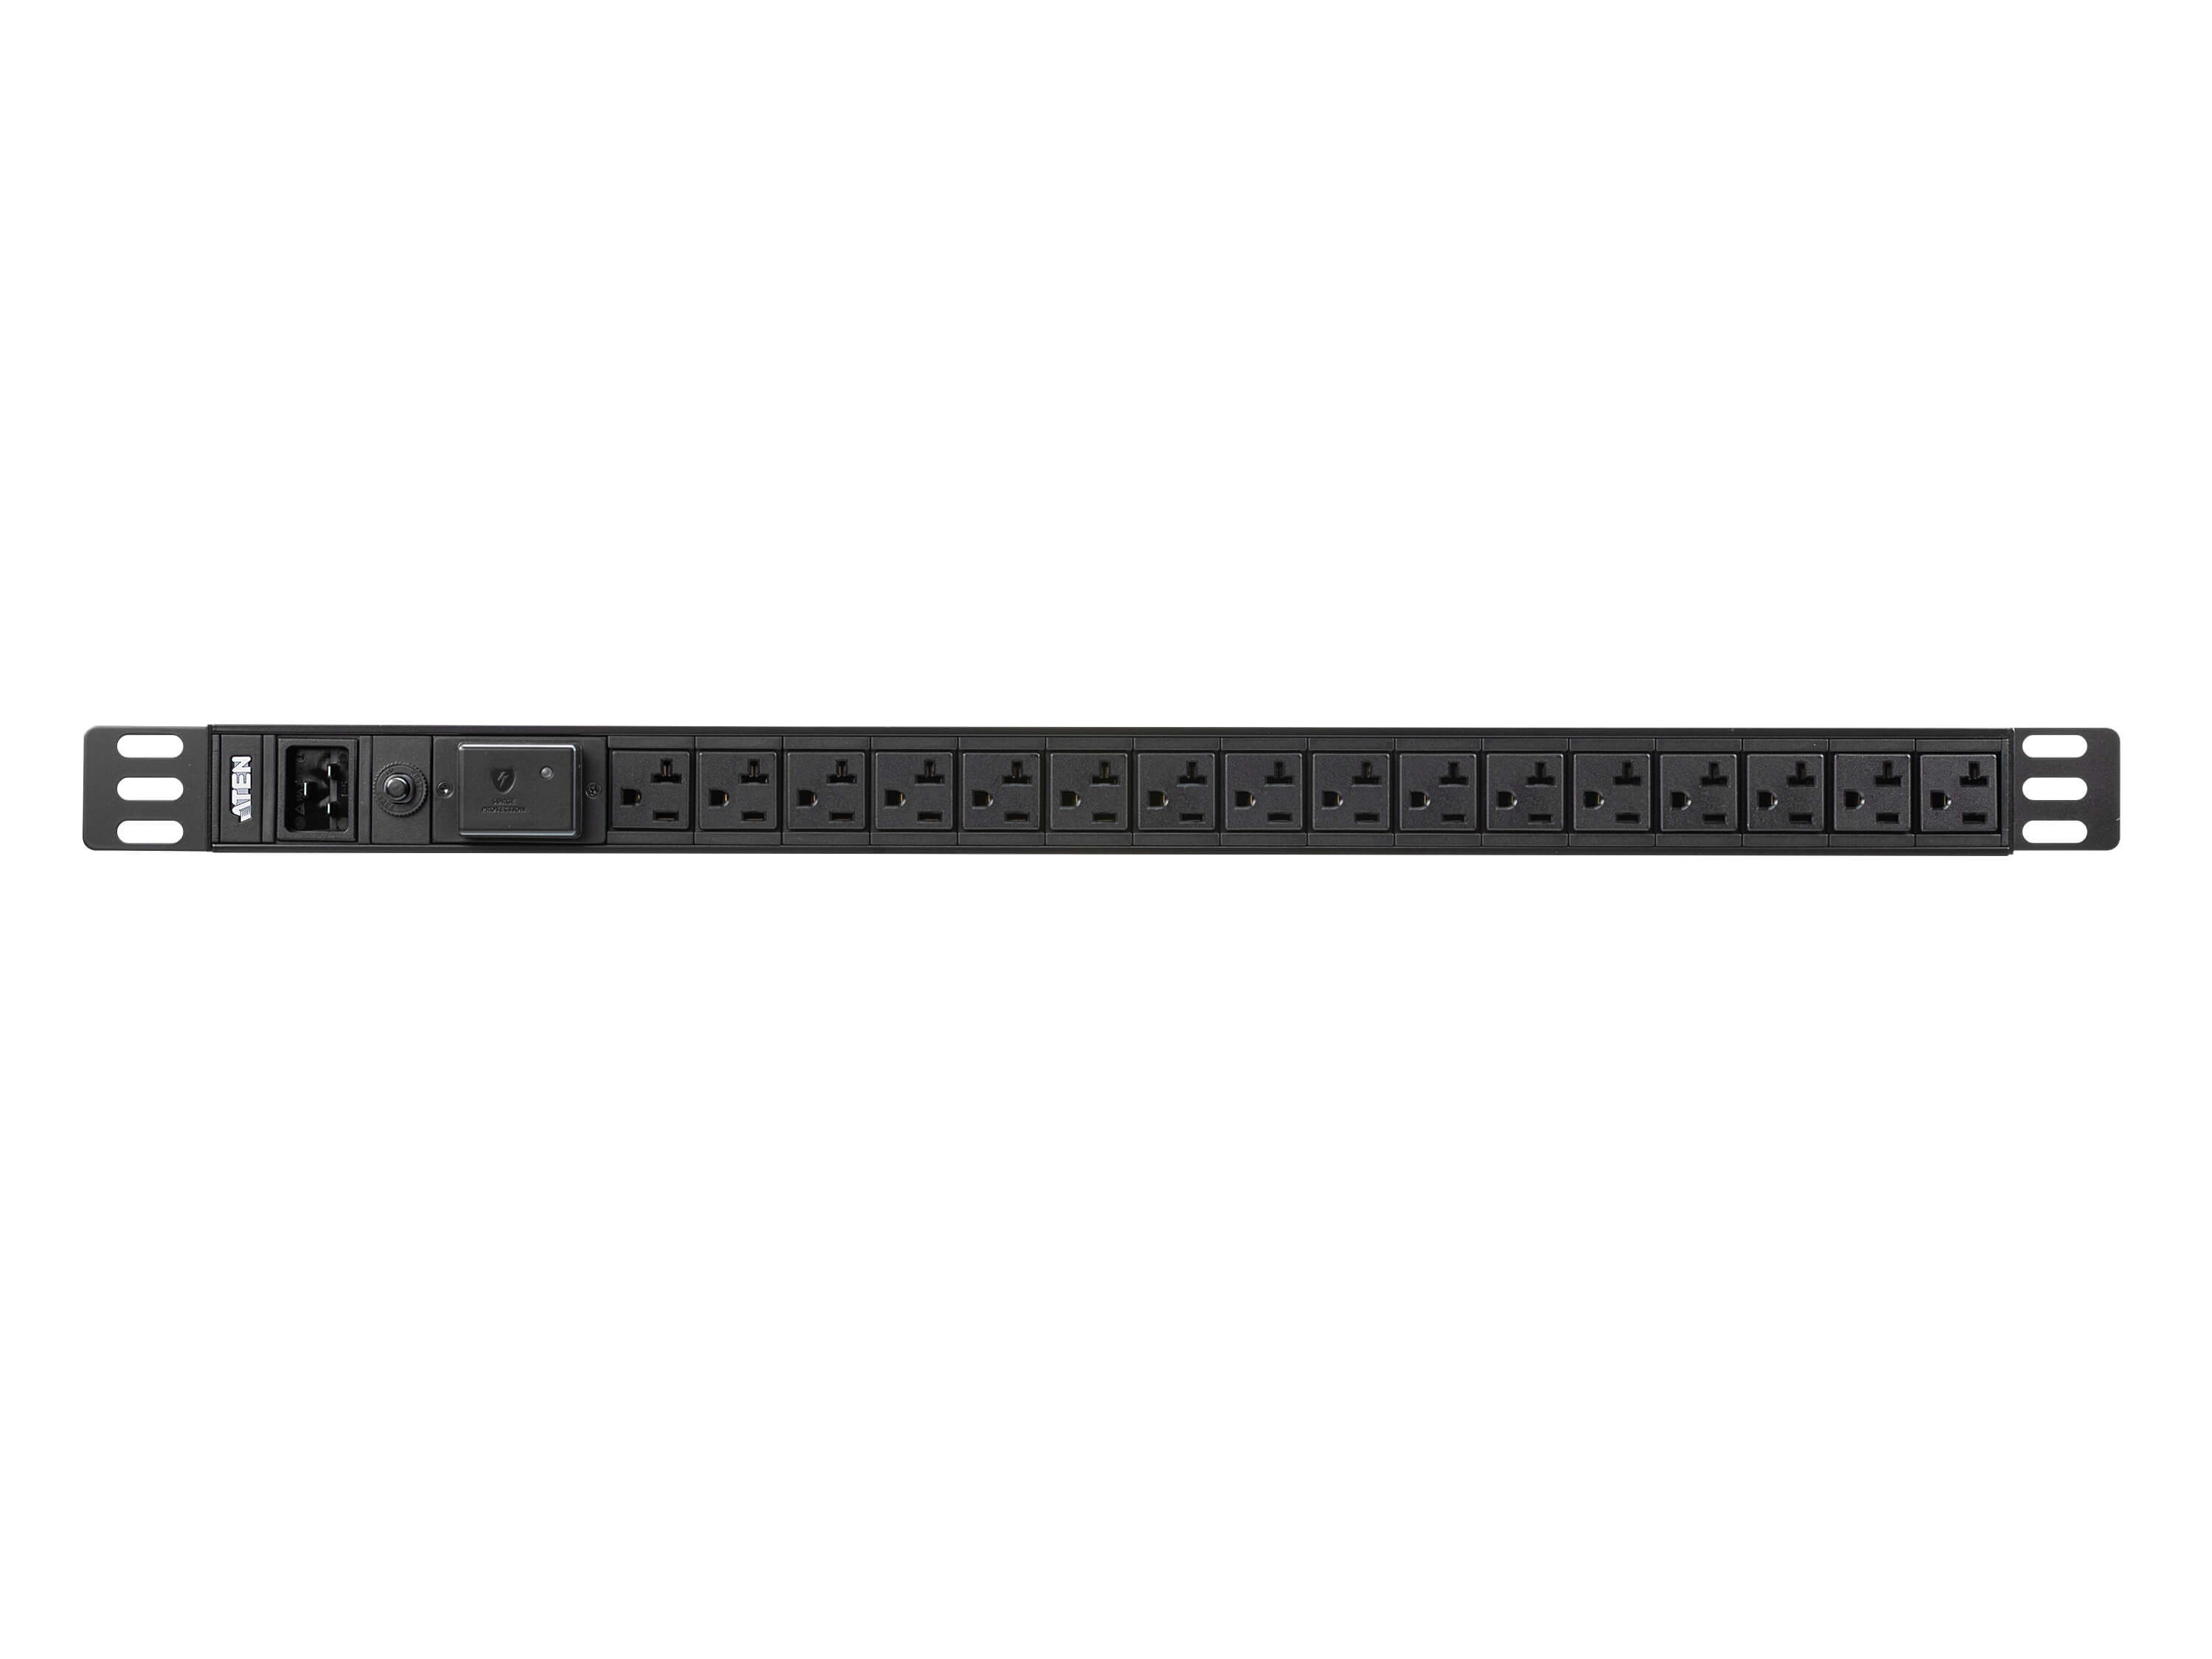 PE0216SA Basic PDU with Surge Protection/100-120 VAC/15A Max by Aten